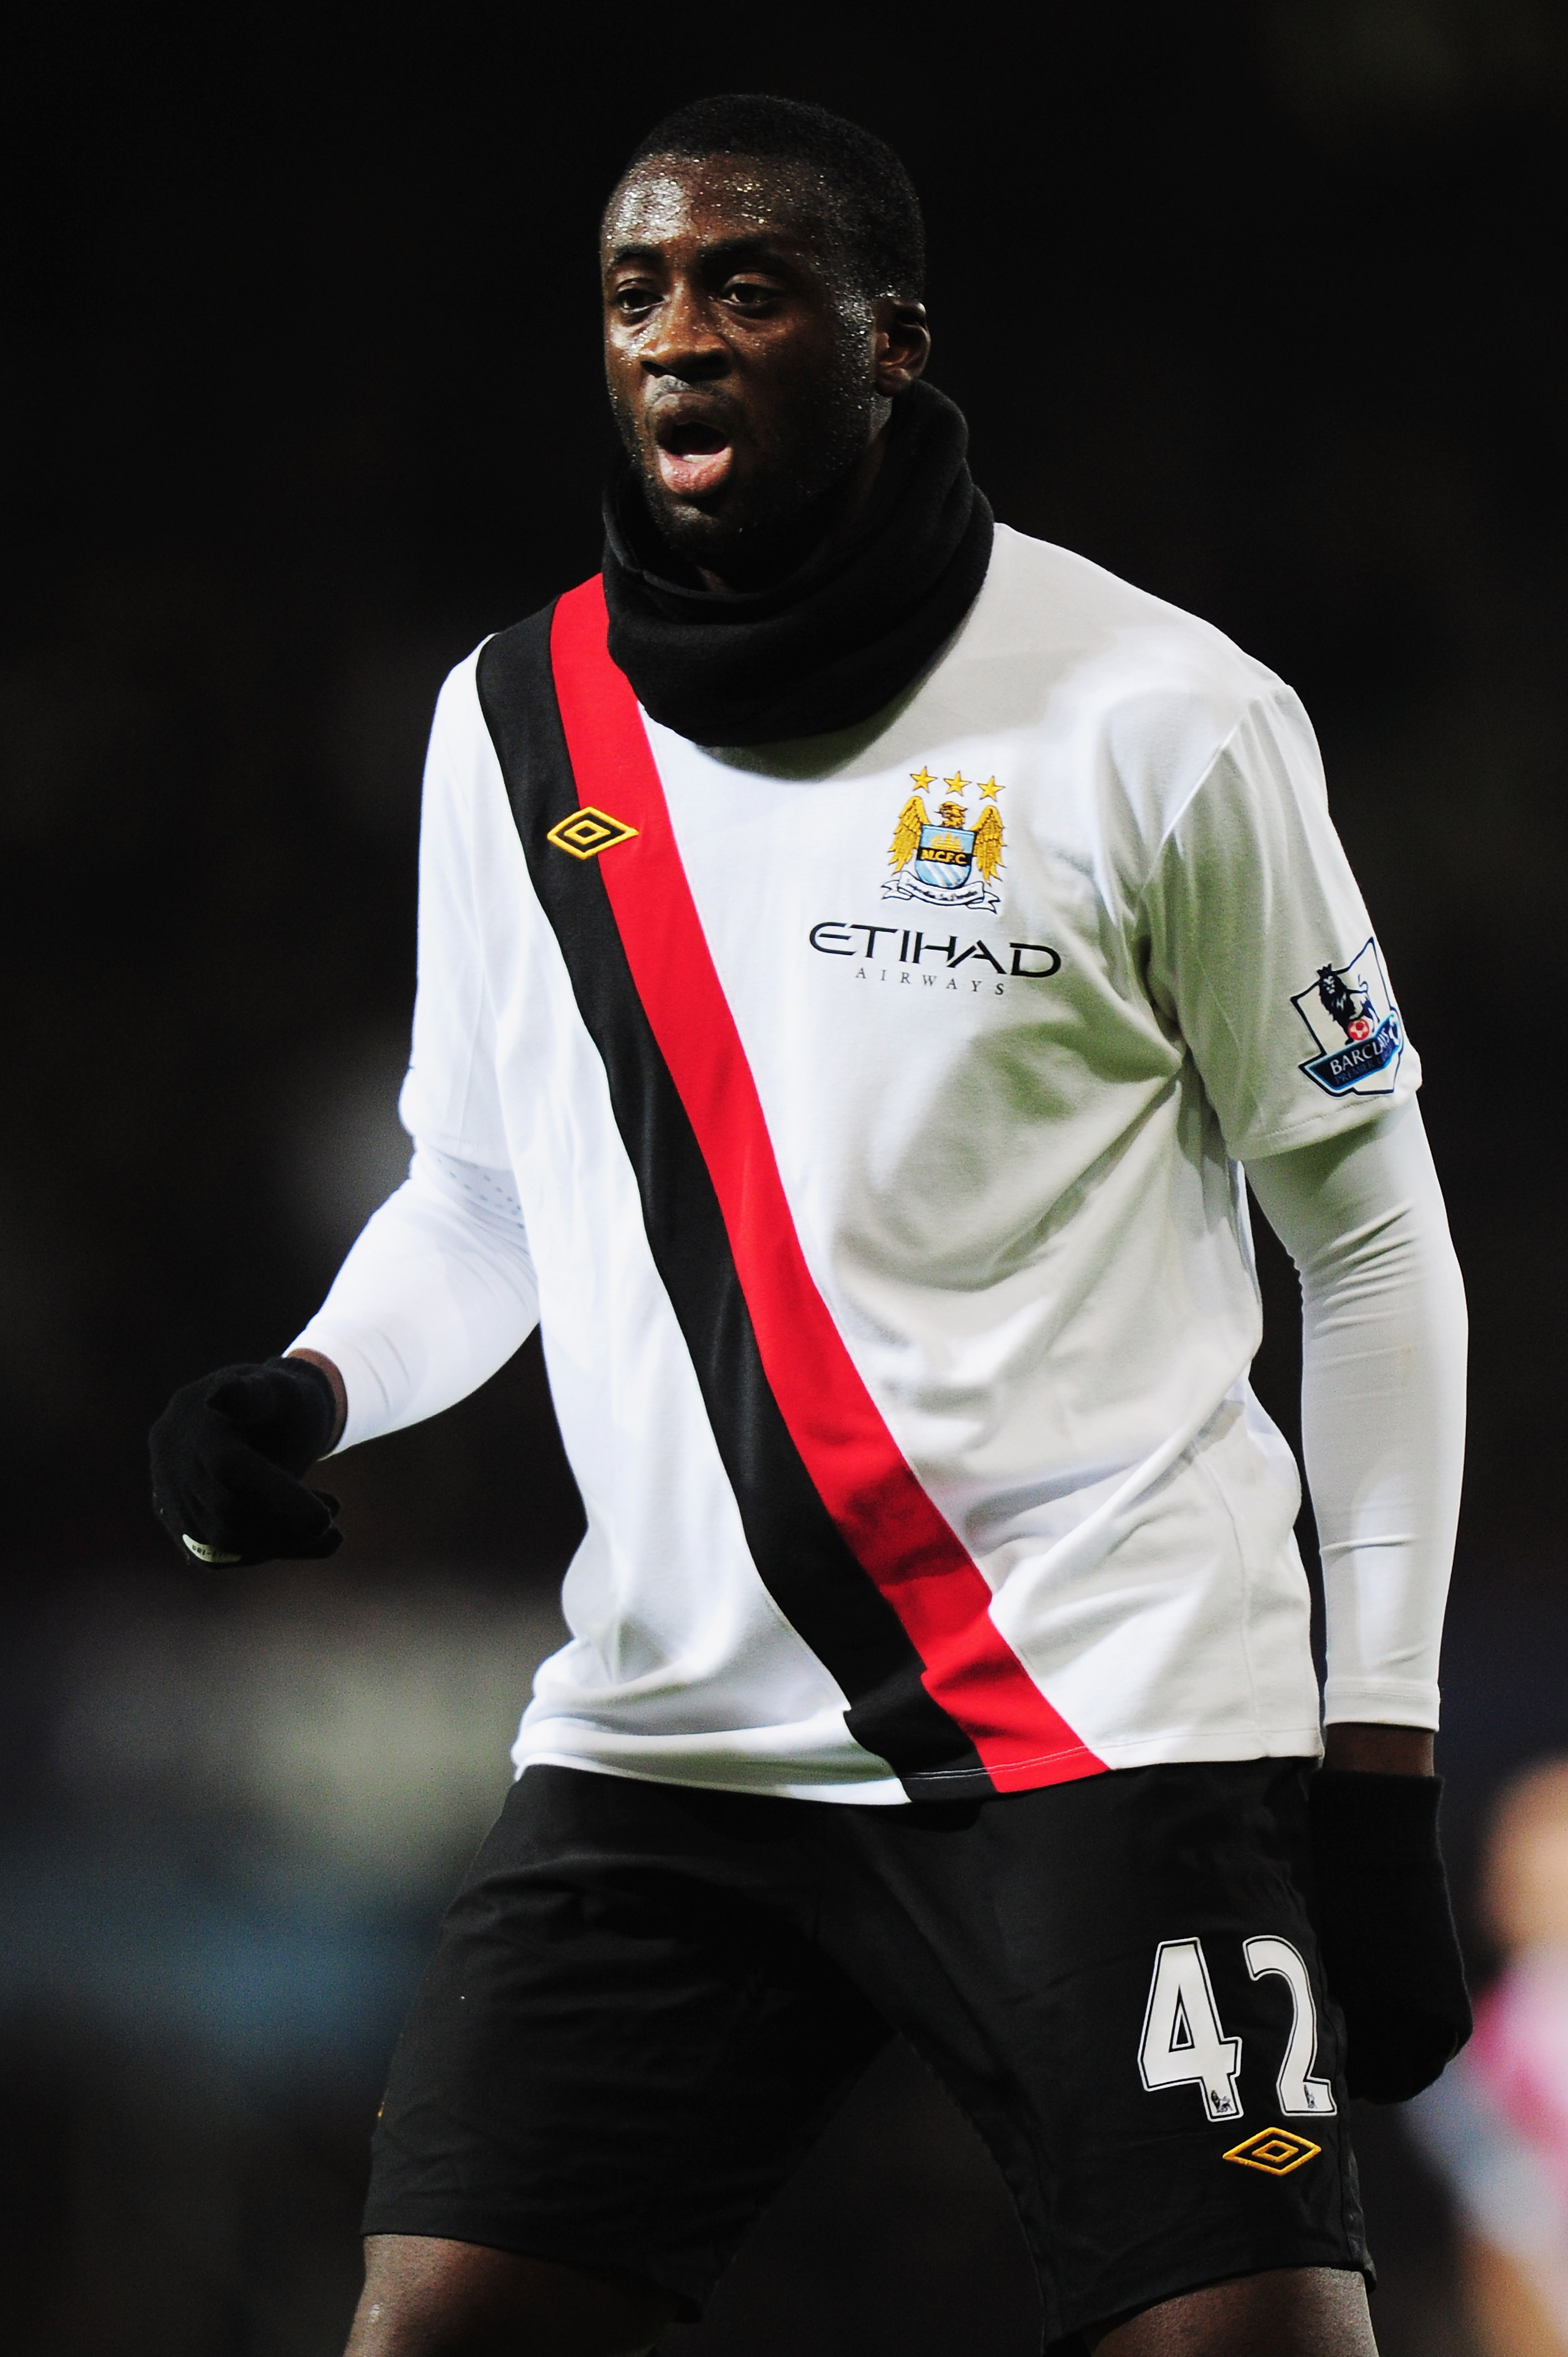 LONDON, UNITED KINGDOM - DECEMBER 11: Yaya Toure of Manchester City in action during the Barclays Premier League match between West Ham United and Manchester City at Upton Park on December 11, 2010 in London, England. (Photo by Shaun Botterill/Getty Image